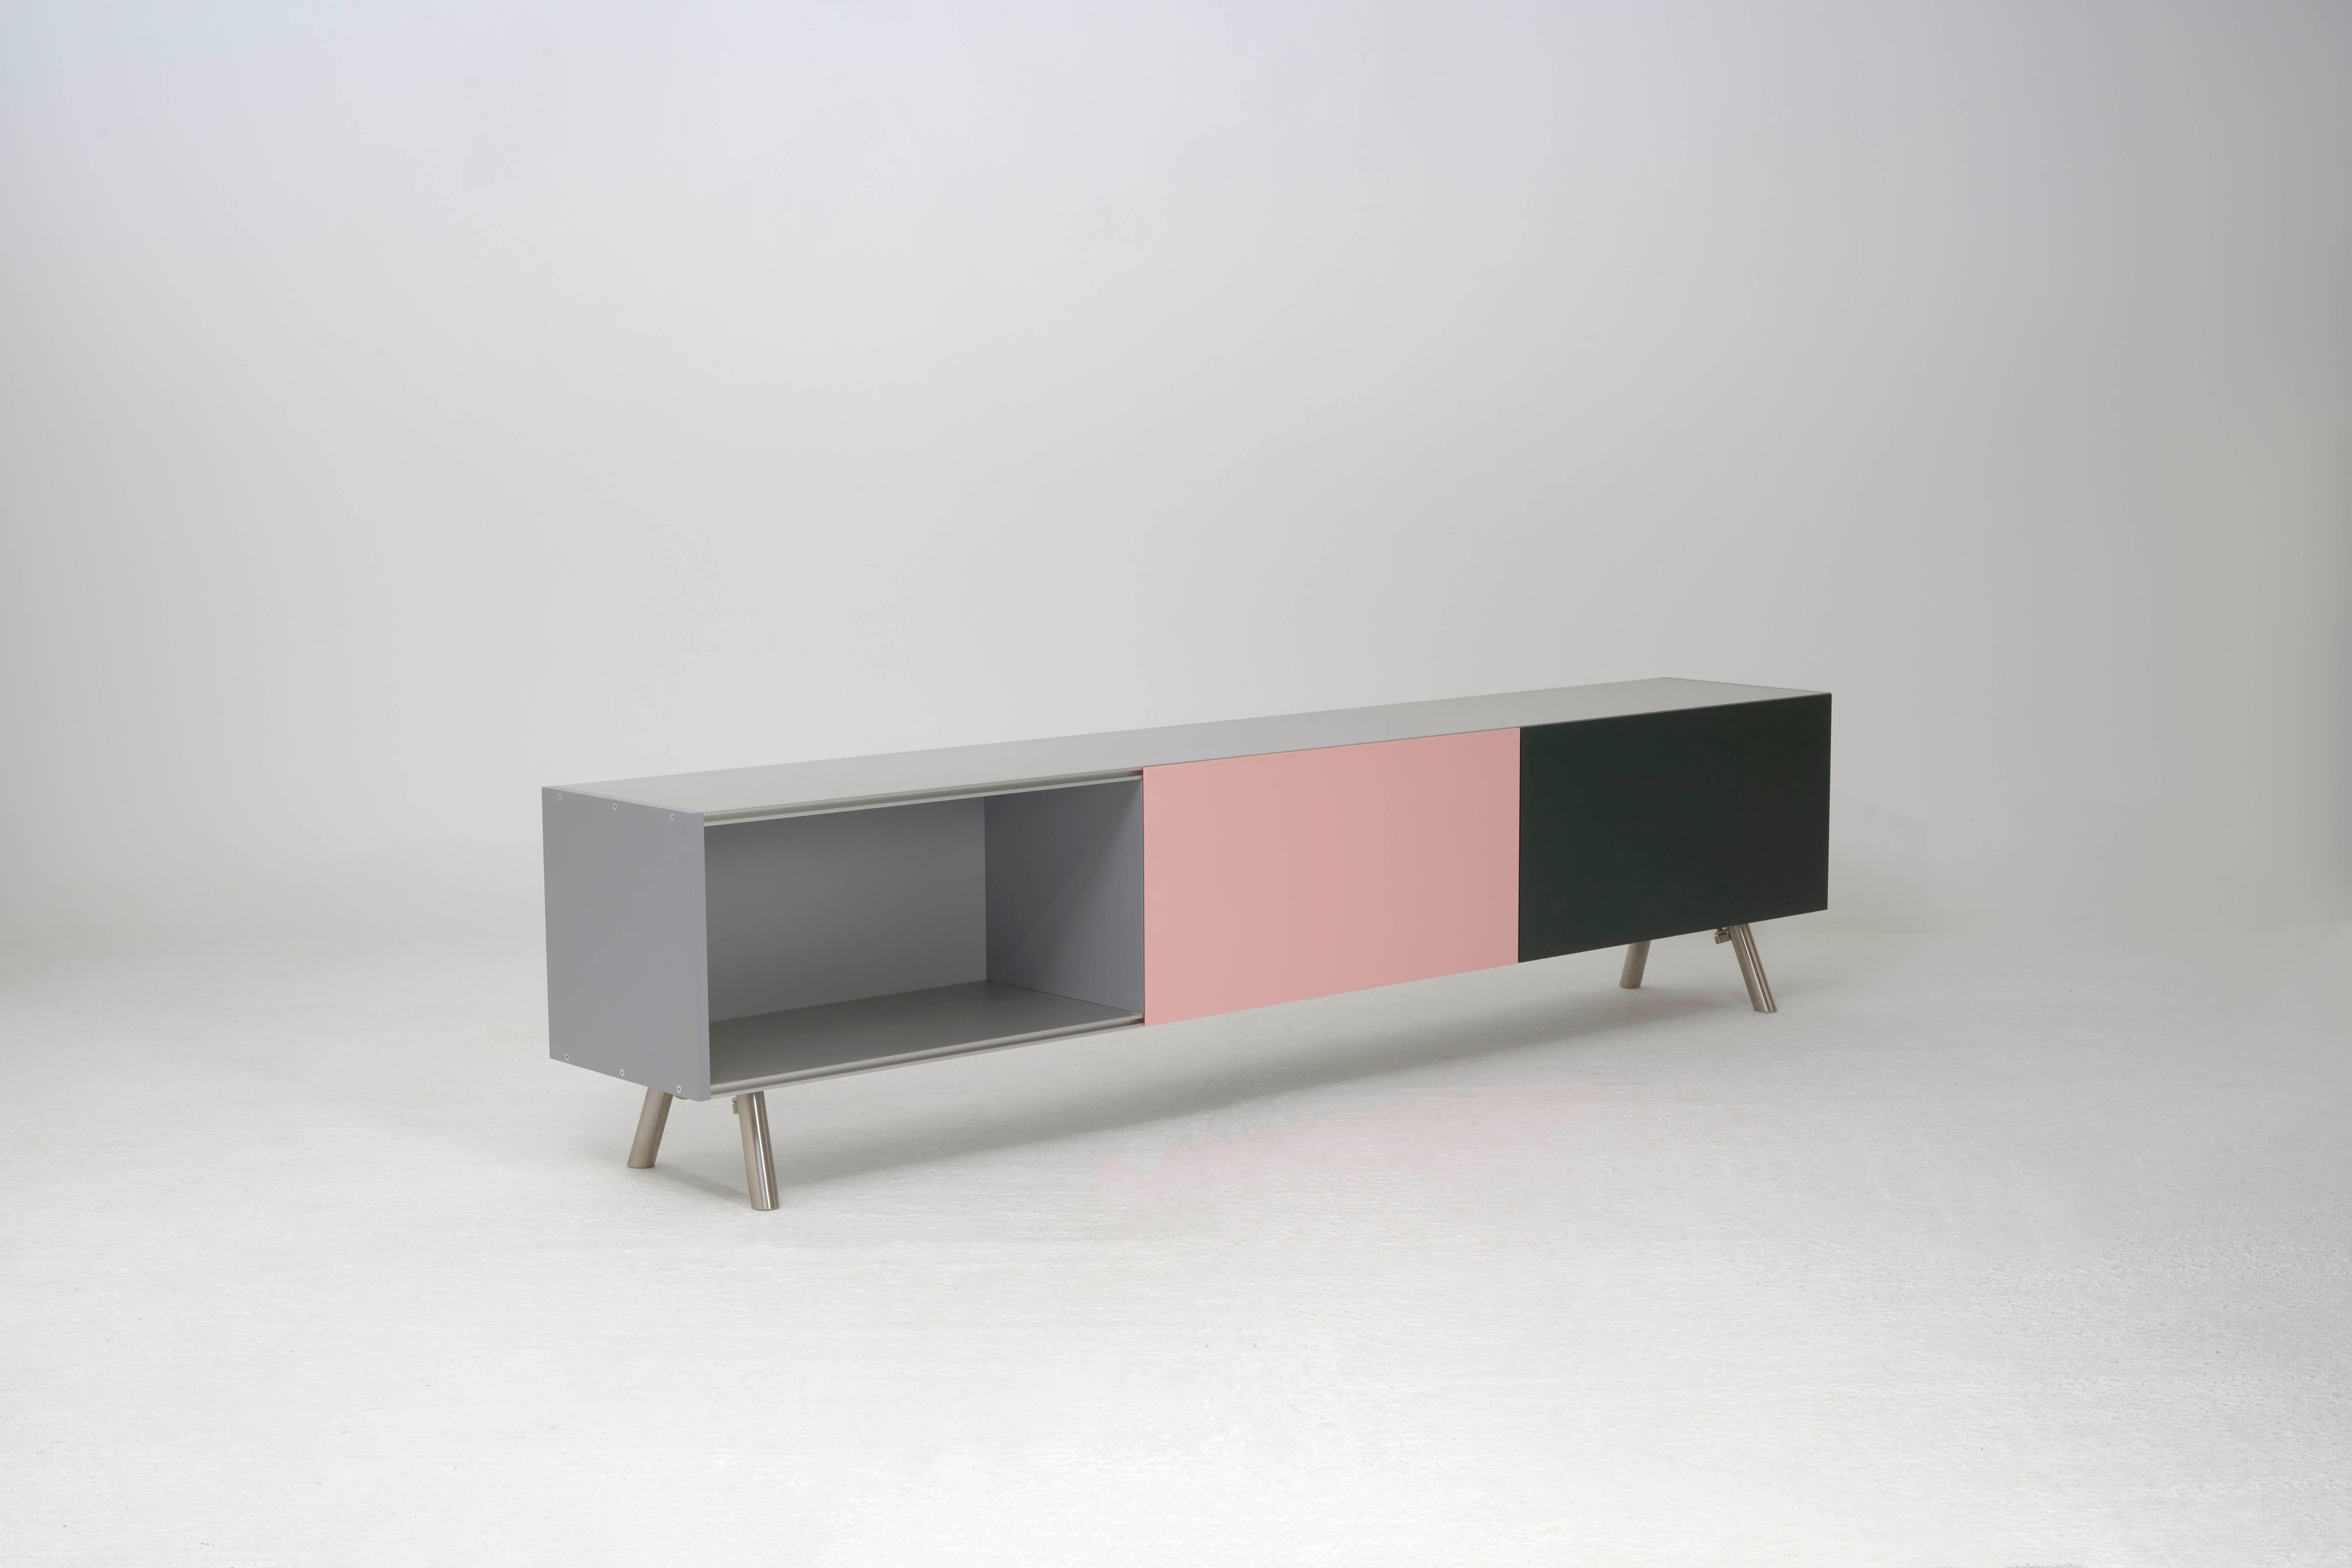 The Kast storage unit is a sideboard by Maarten Van Severen.

Belgian-born Maarten van Severen, who worked with architect Rem Koolhaas and designed pieces for Vitra, Edra, Kartell, and Alessi, was one of the most acclaimed designers of his